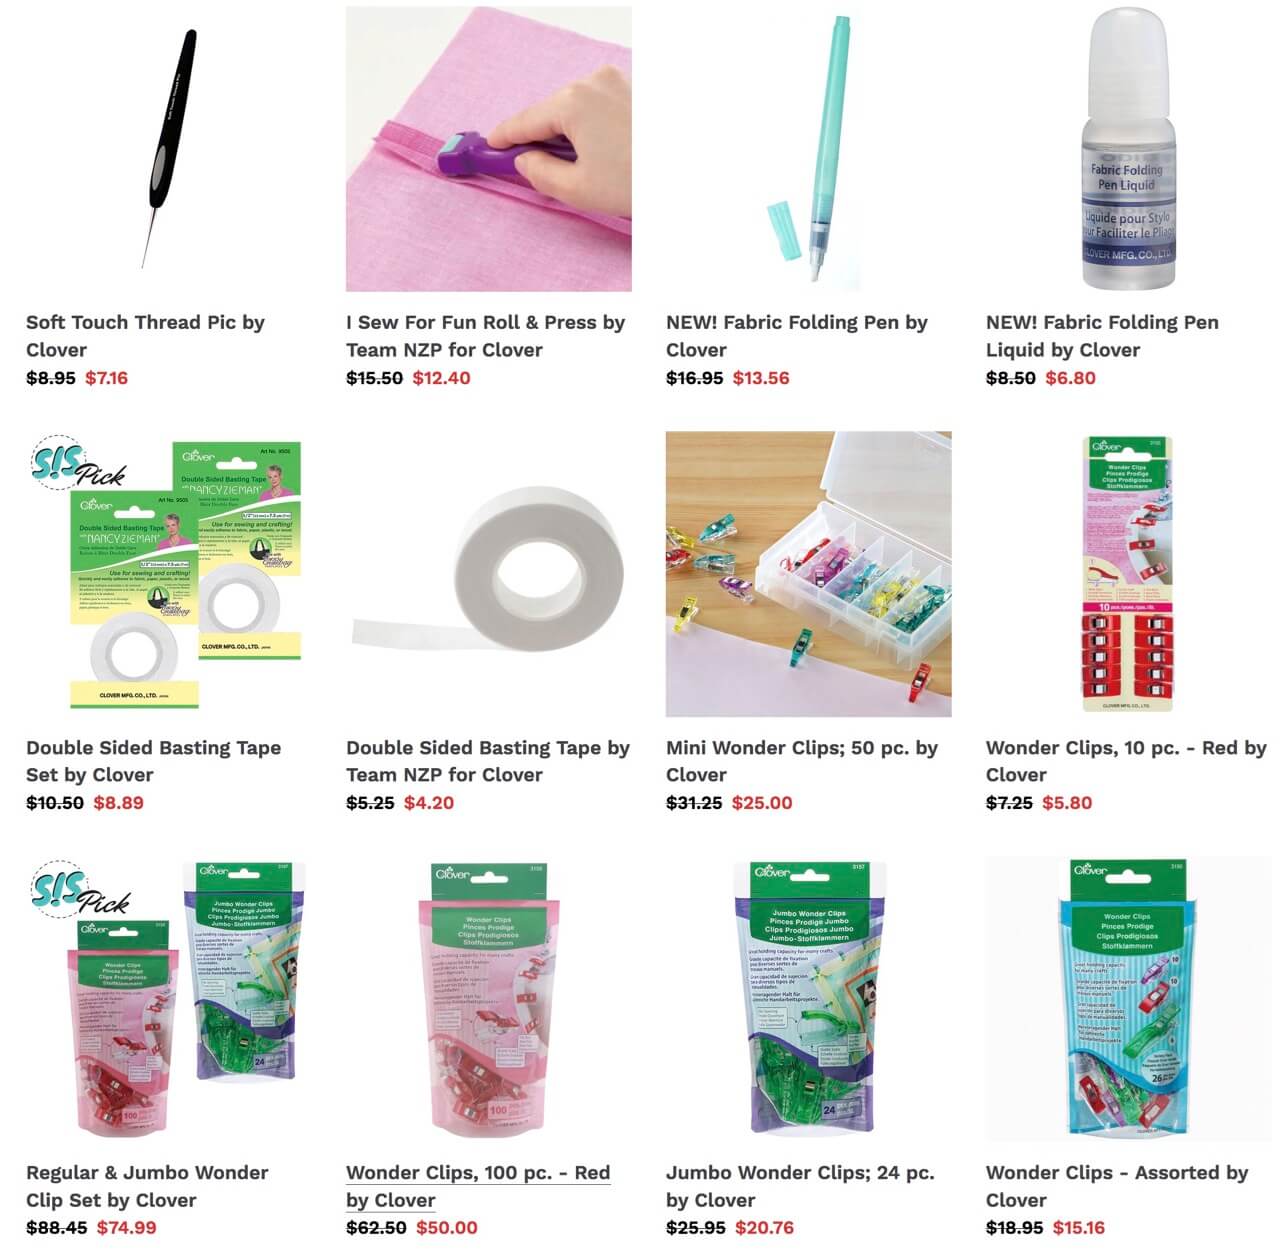 Save 20% off all Clover Products through May 31 at Nancy Zieman Productions at ShopNZP.com